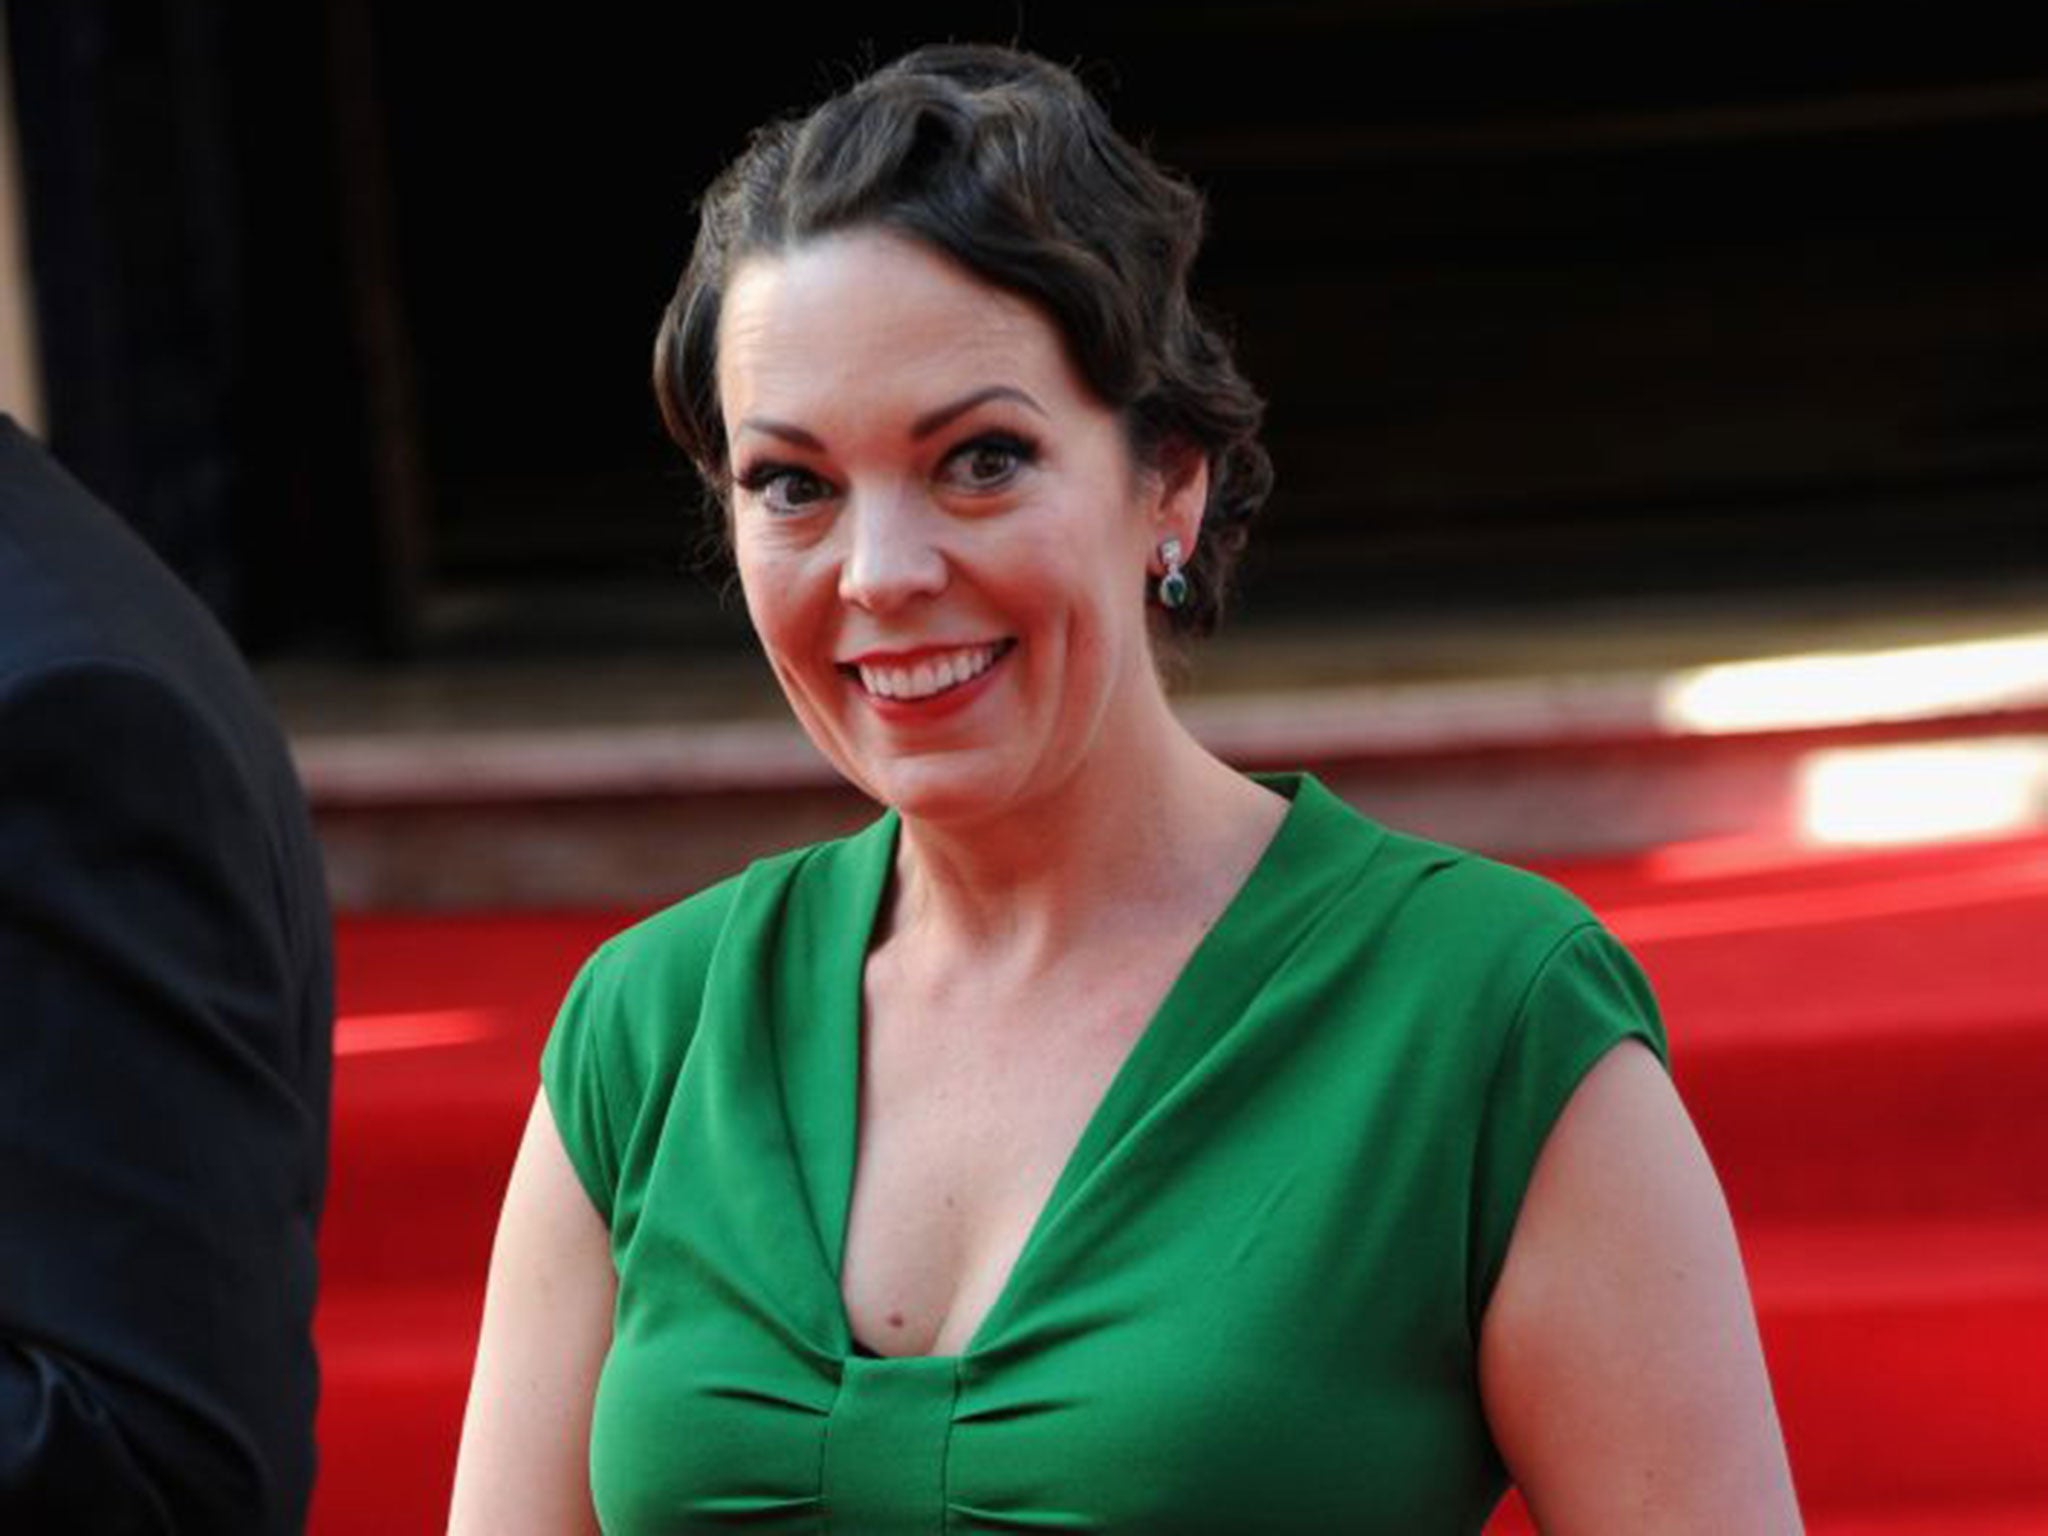 Olivia Colman topped the list of the 30 most influential females in broadcasting